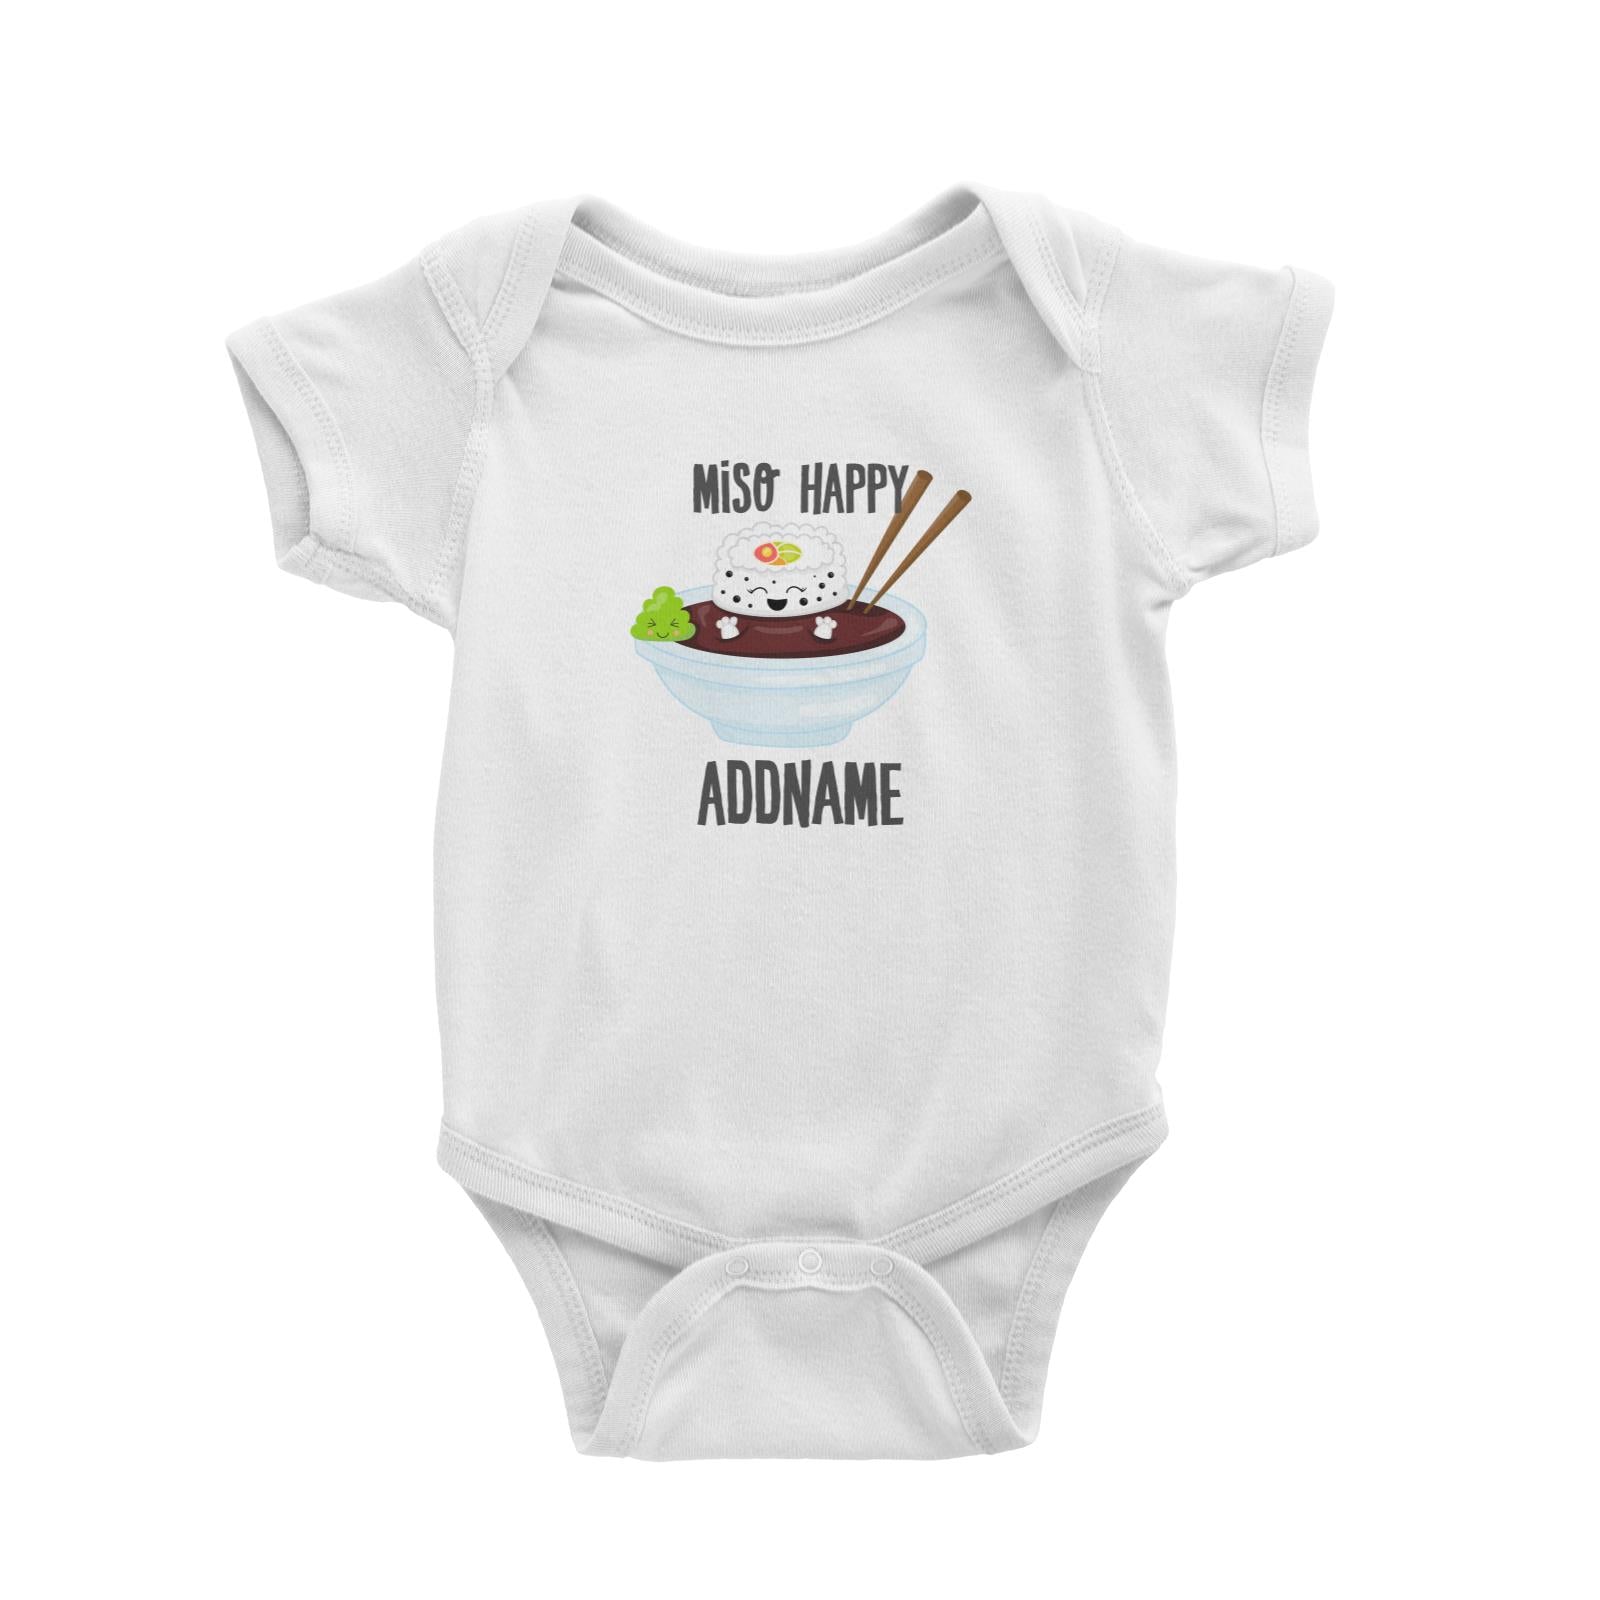 Miso Happy Sushi in Soy Sauce Addname White Baby Romper